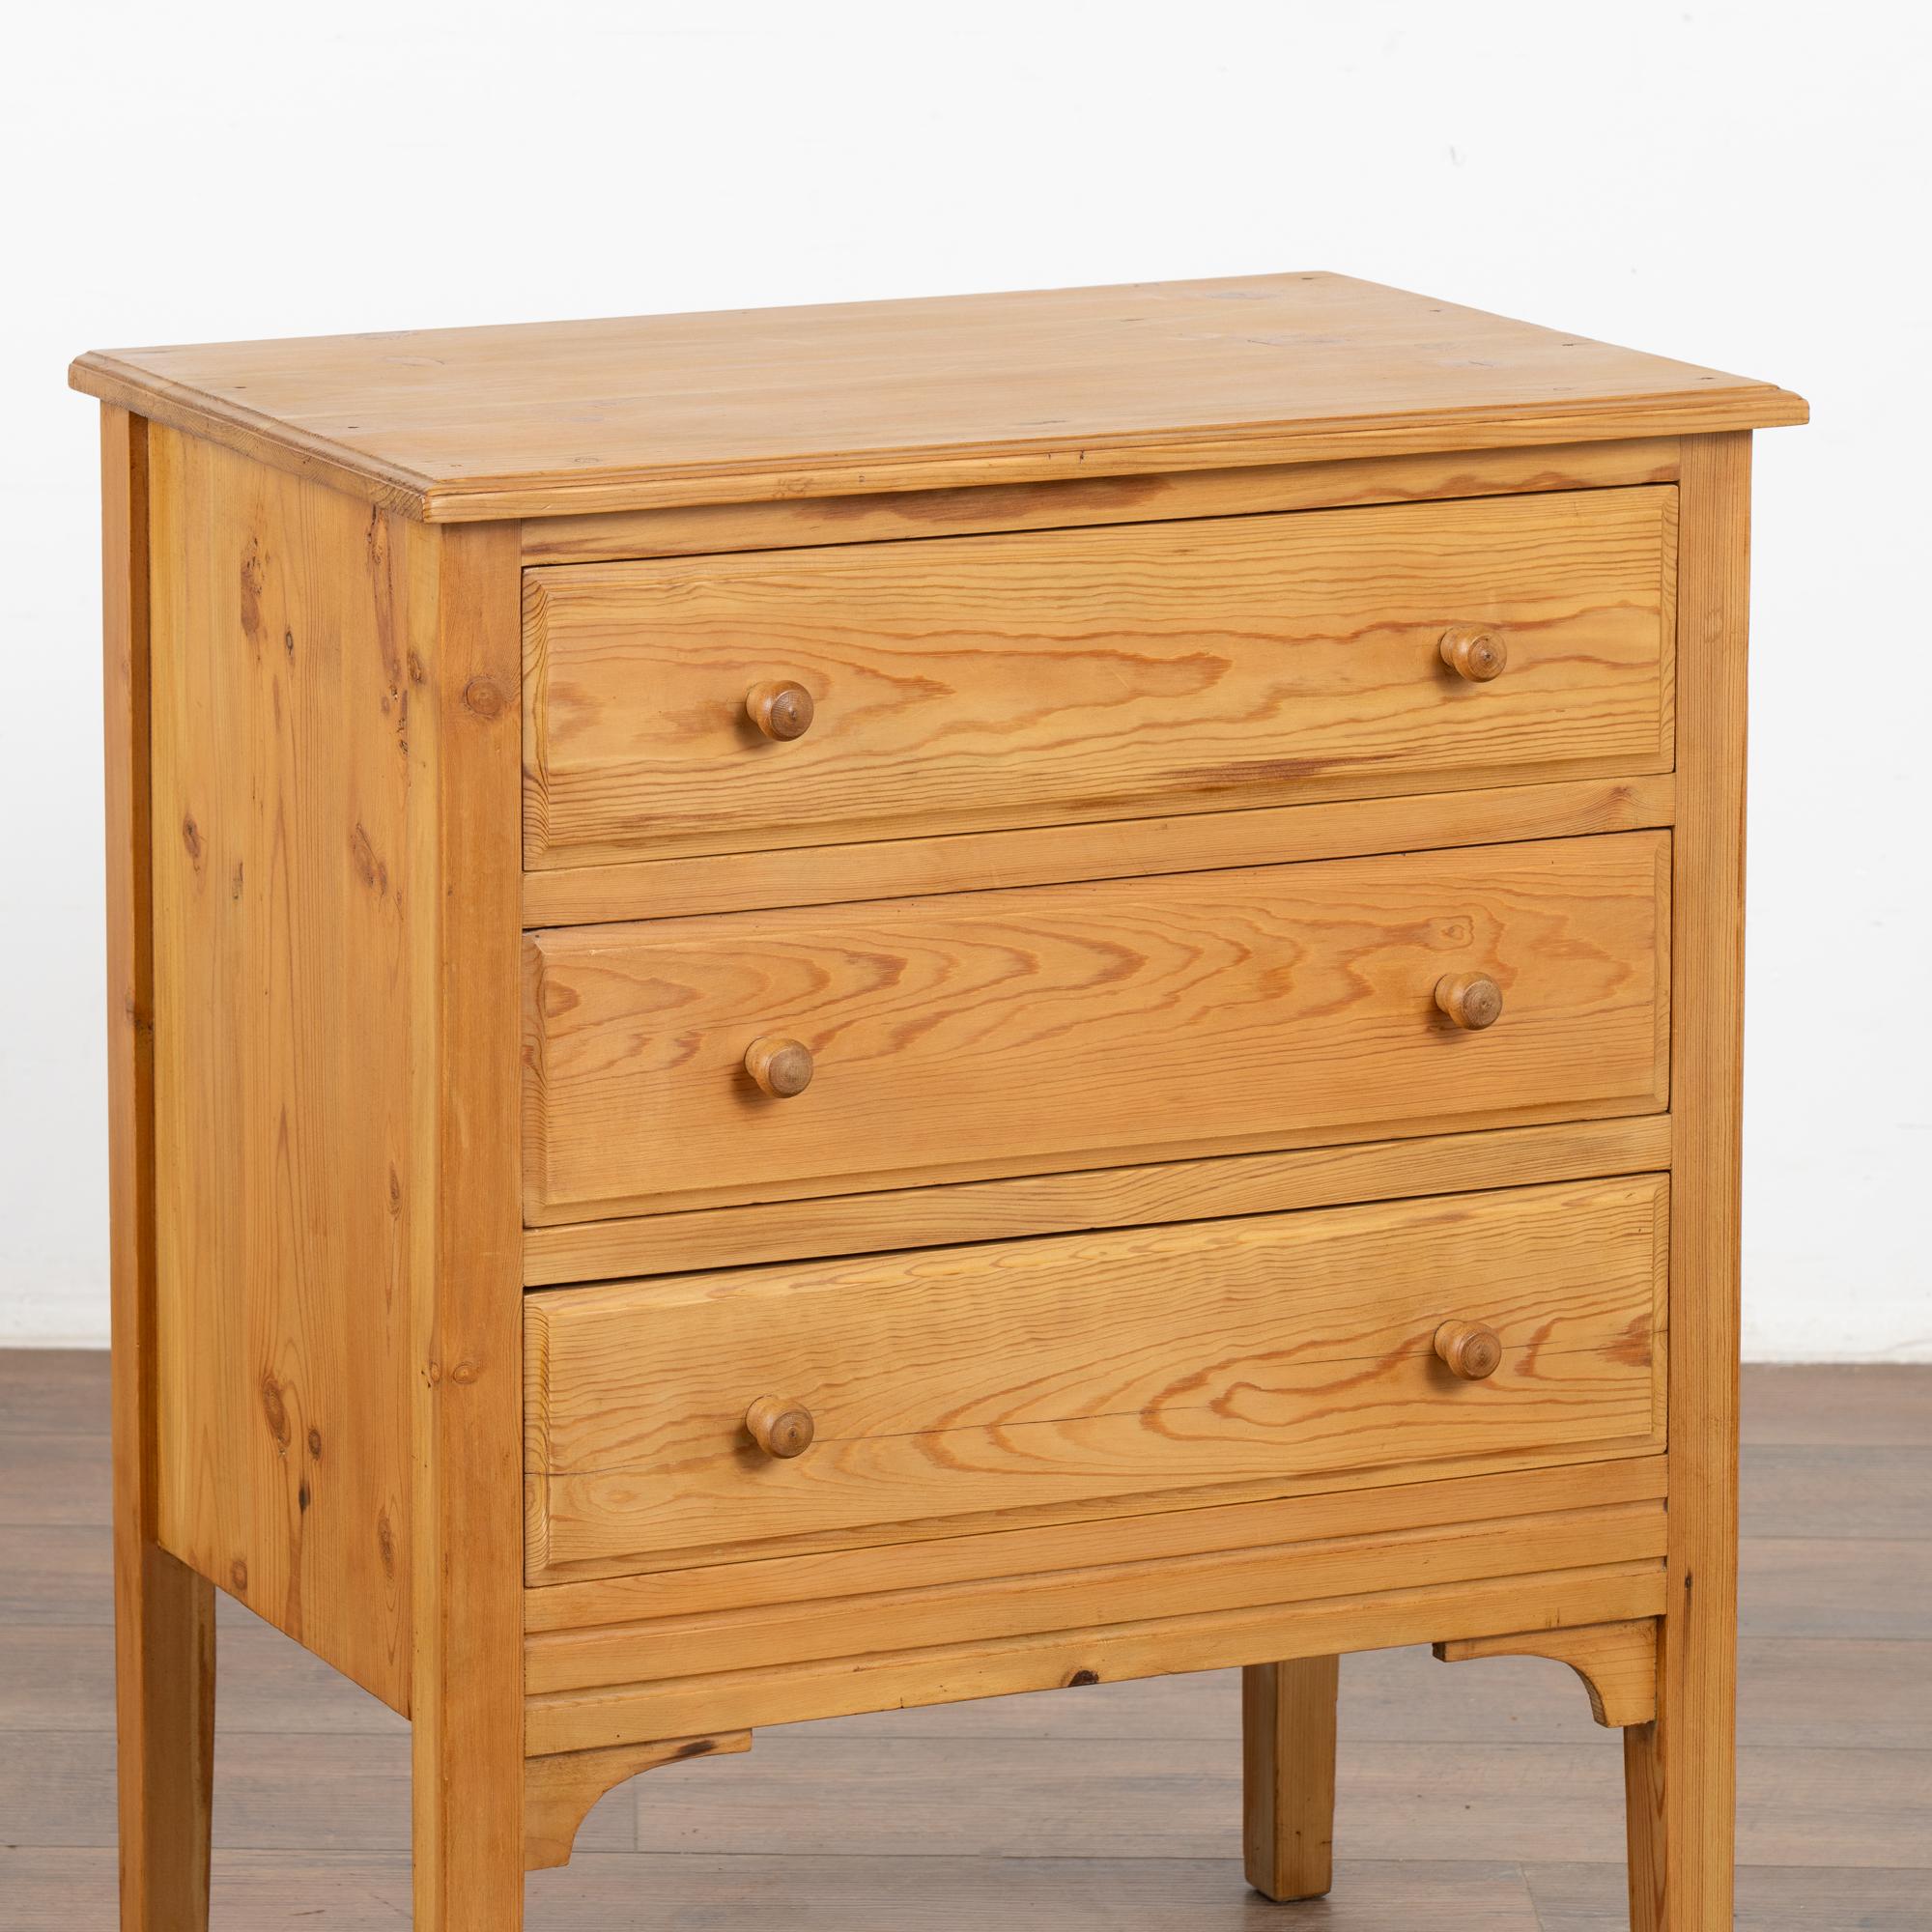 20th Century Vintage Pine Small Chest of Drawers Nightstand, Denmark circa 1940 For Sale